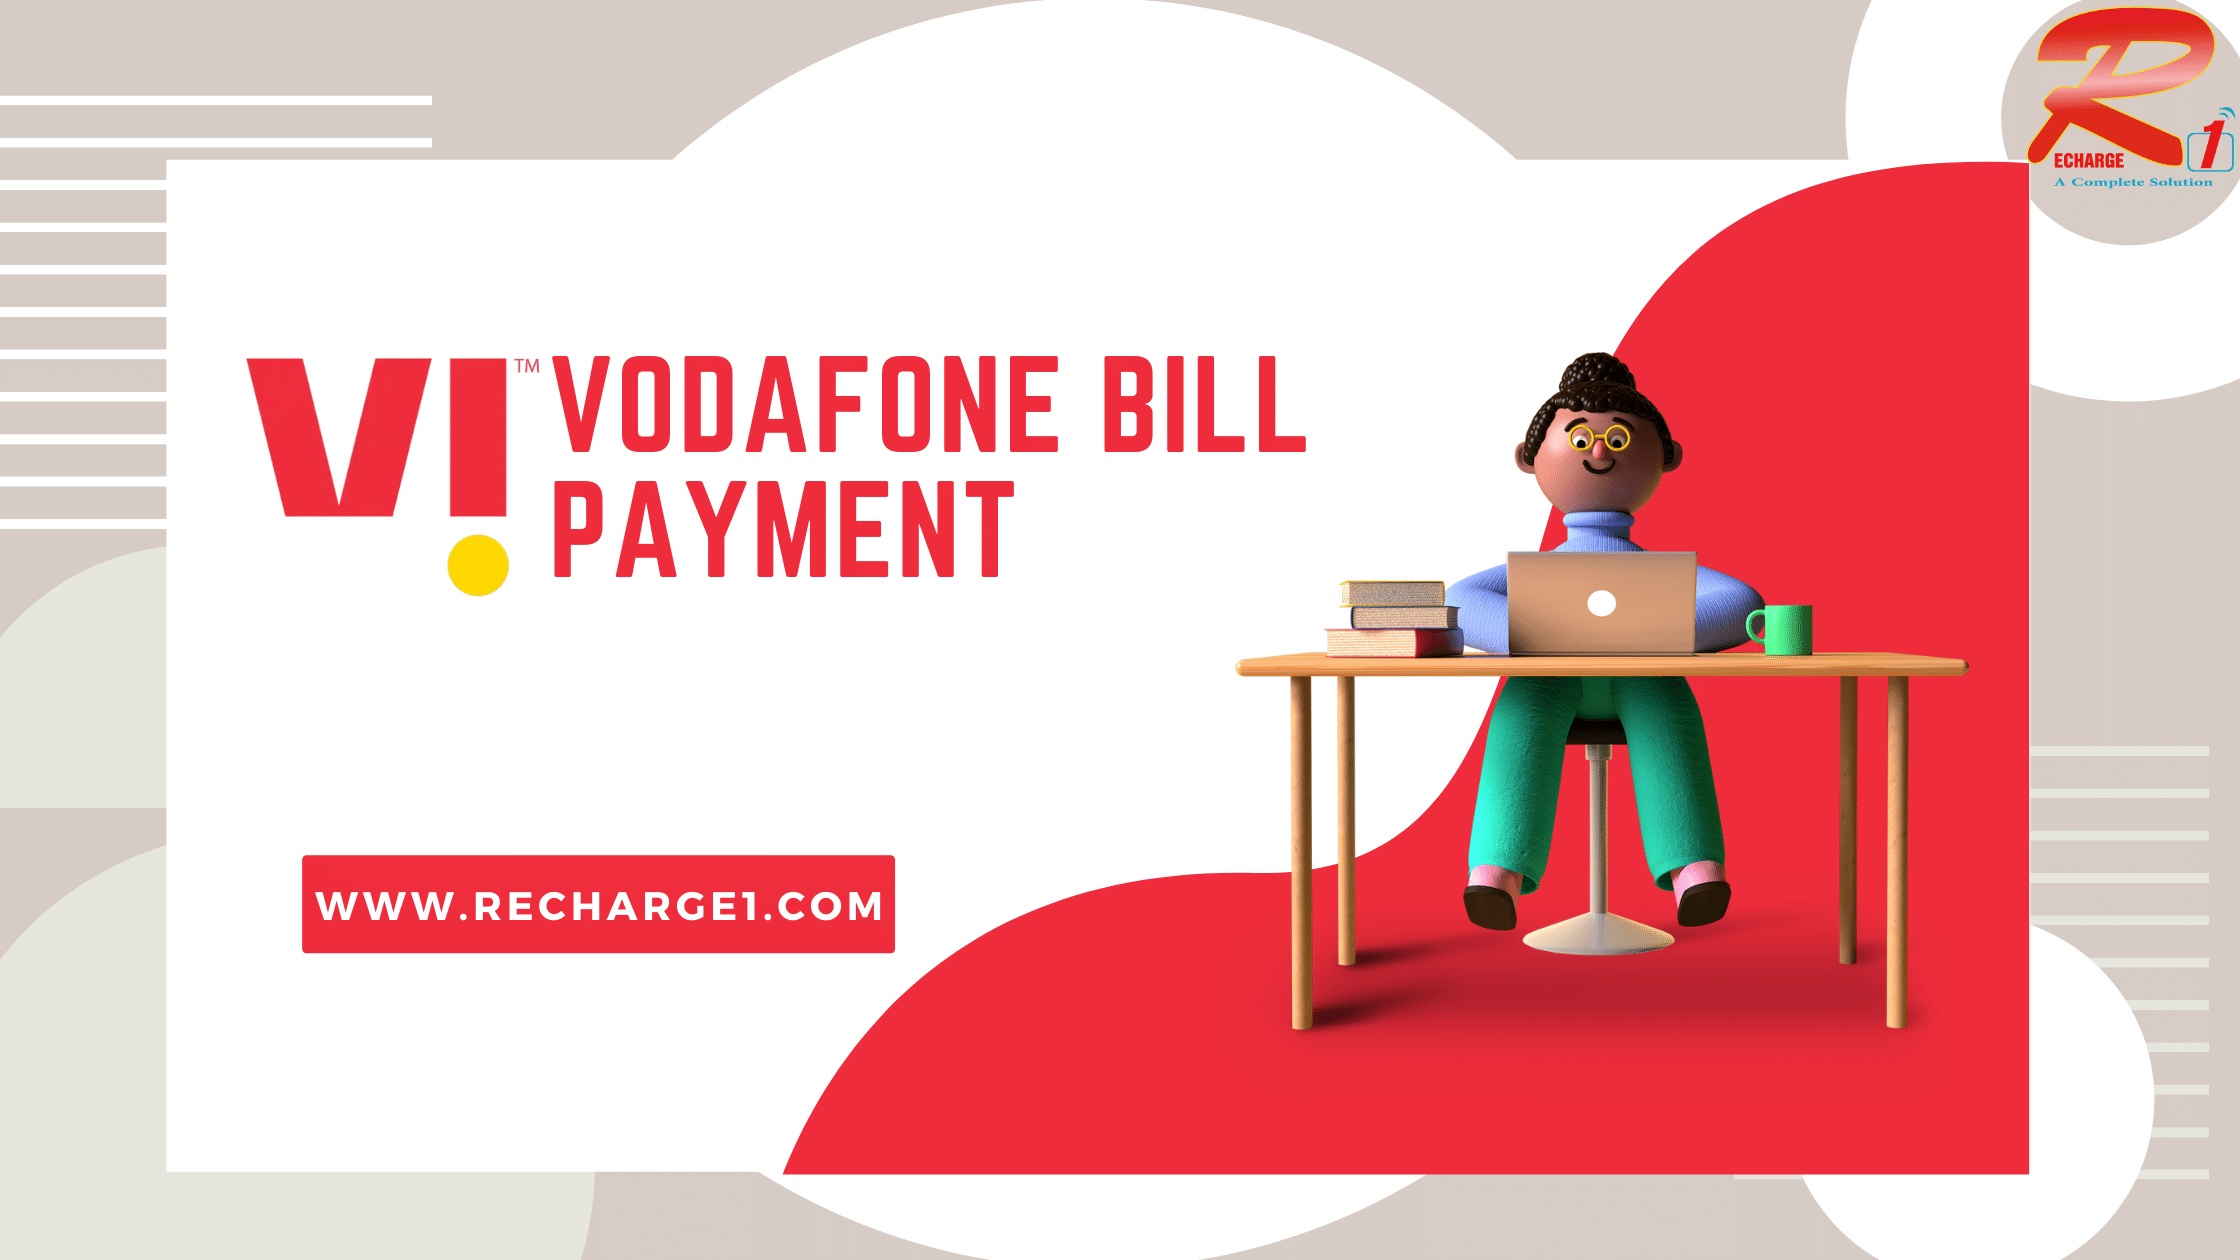  Vodafone Bill Payment: Easy, Secure & Instantly